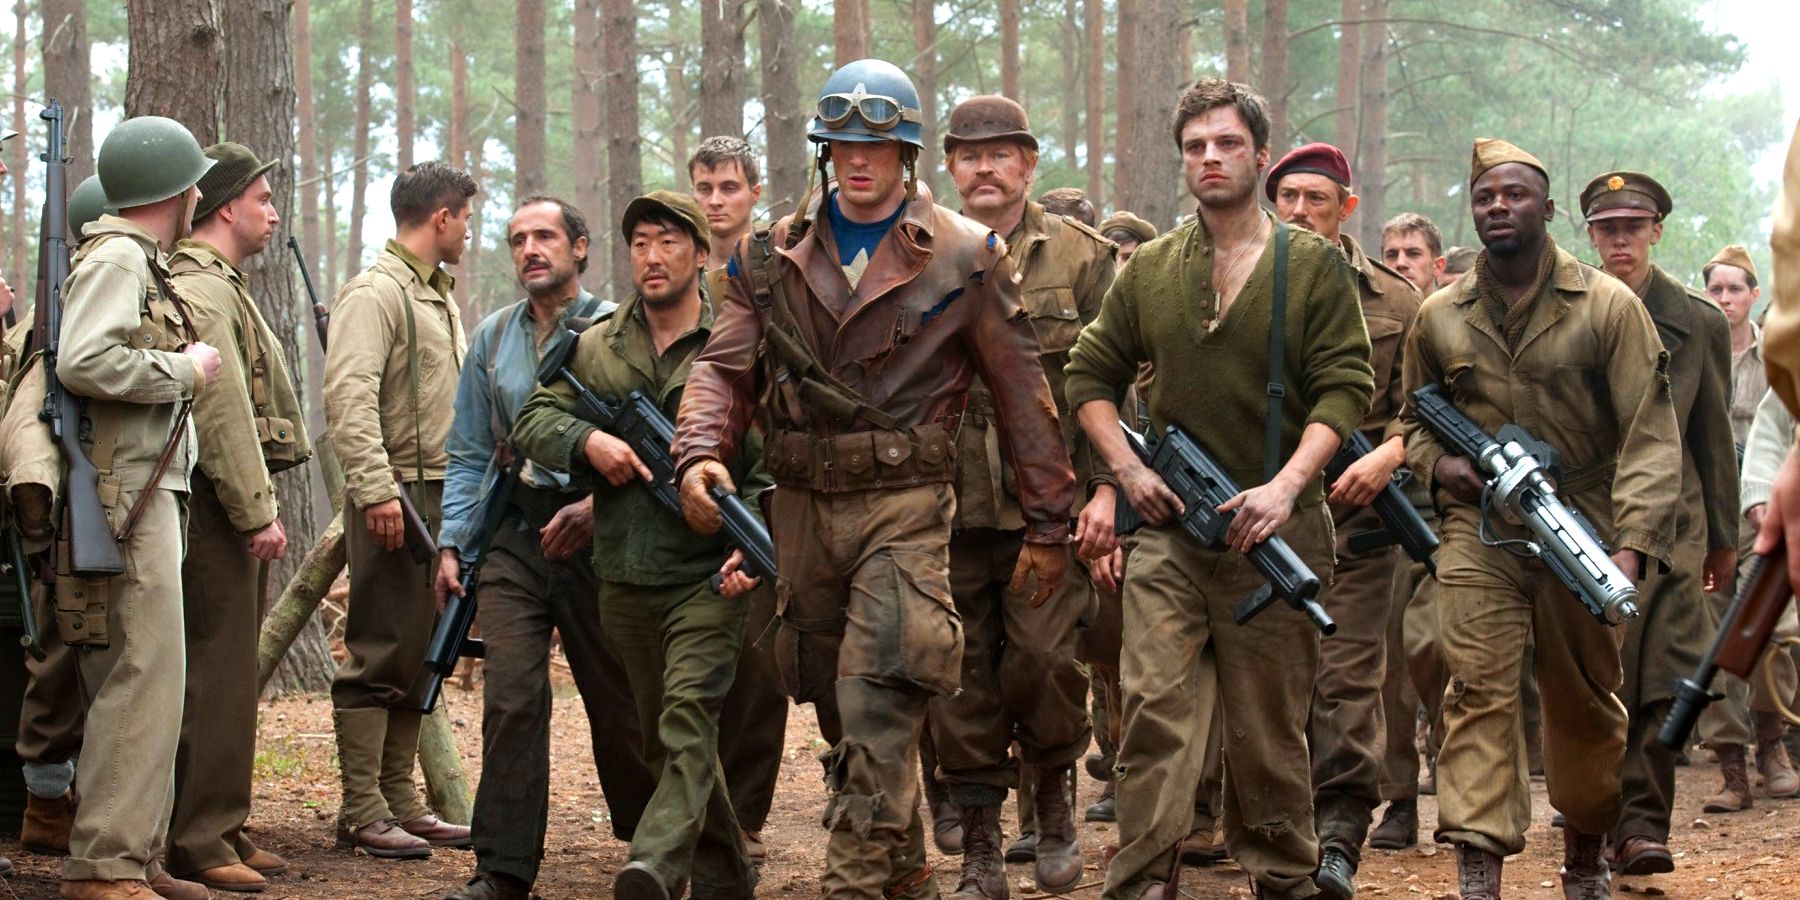 Steve Rogers marches with liberated soldiers in Captain America The First Avenger